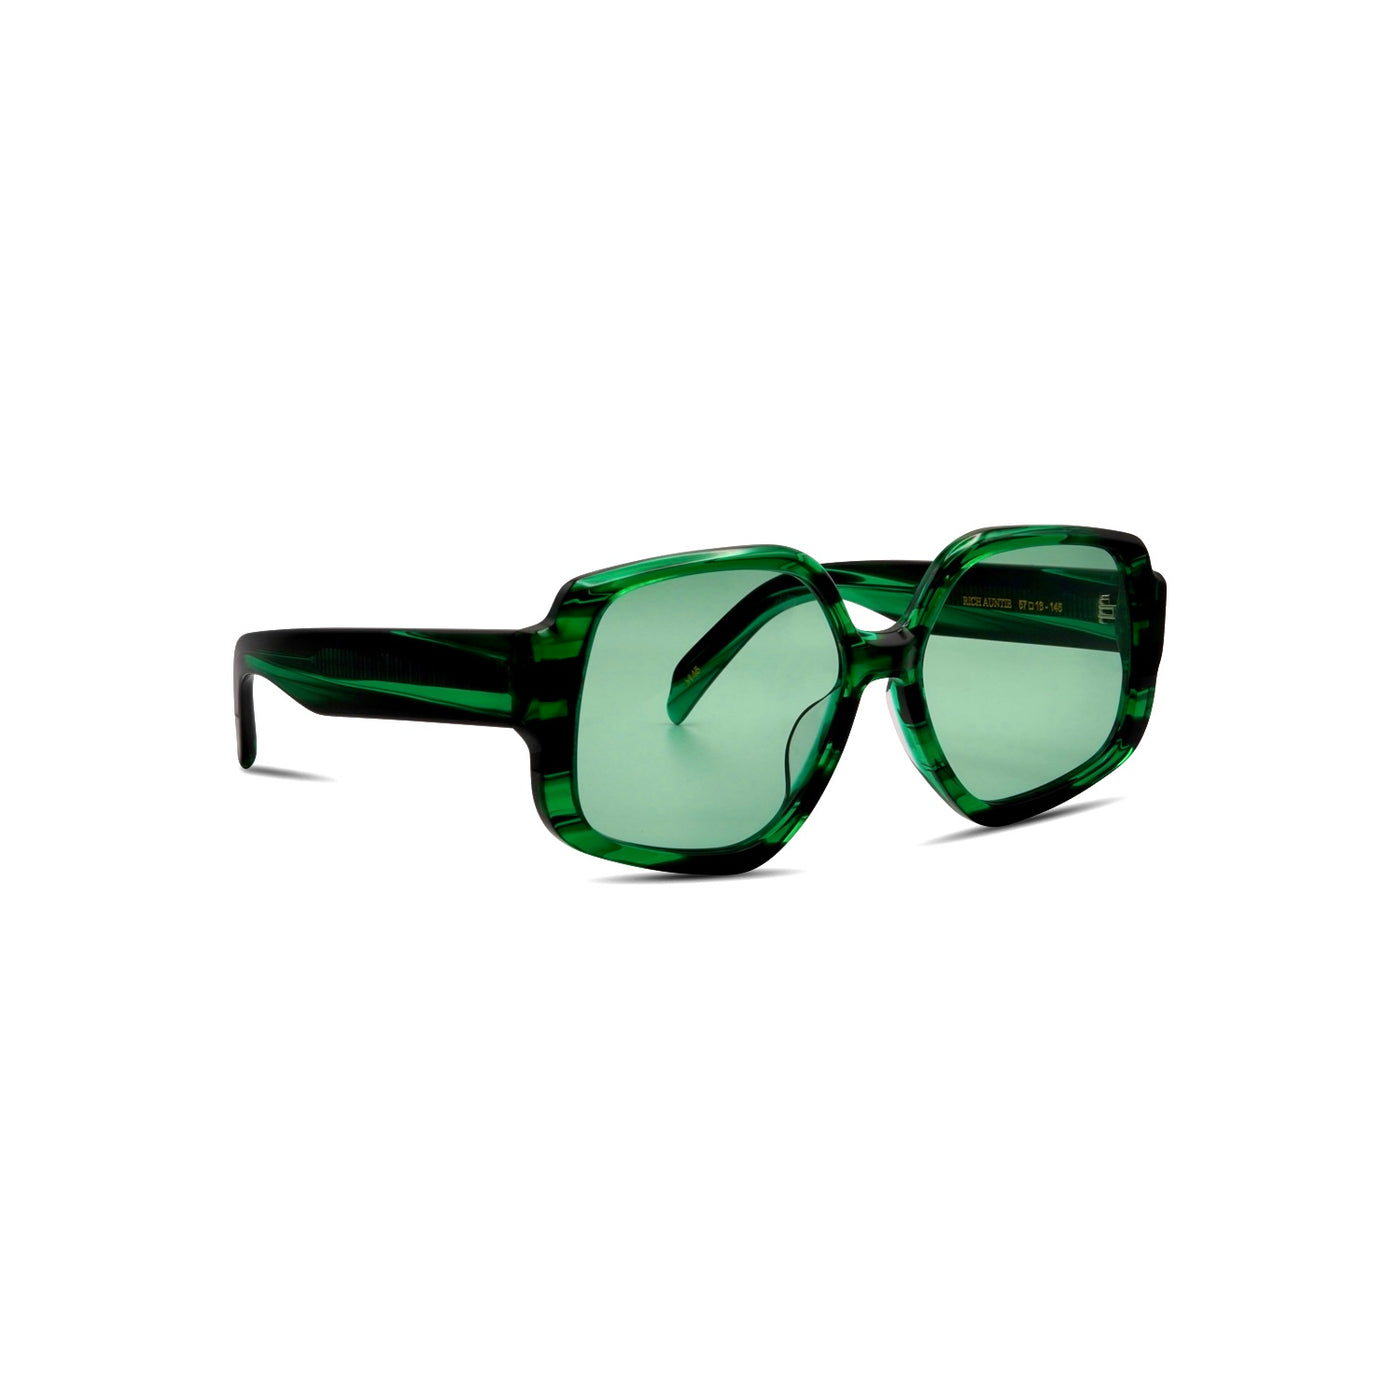 Buy Mens Small Face Snug Fit Color Lens Rectangular Plastic Frame Sunglasses  Green at Amazon.in